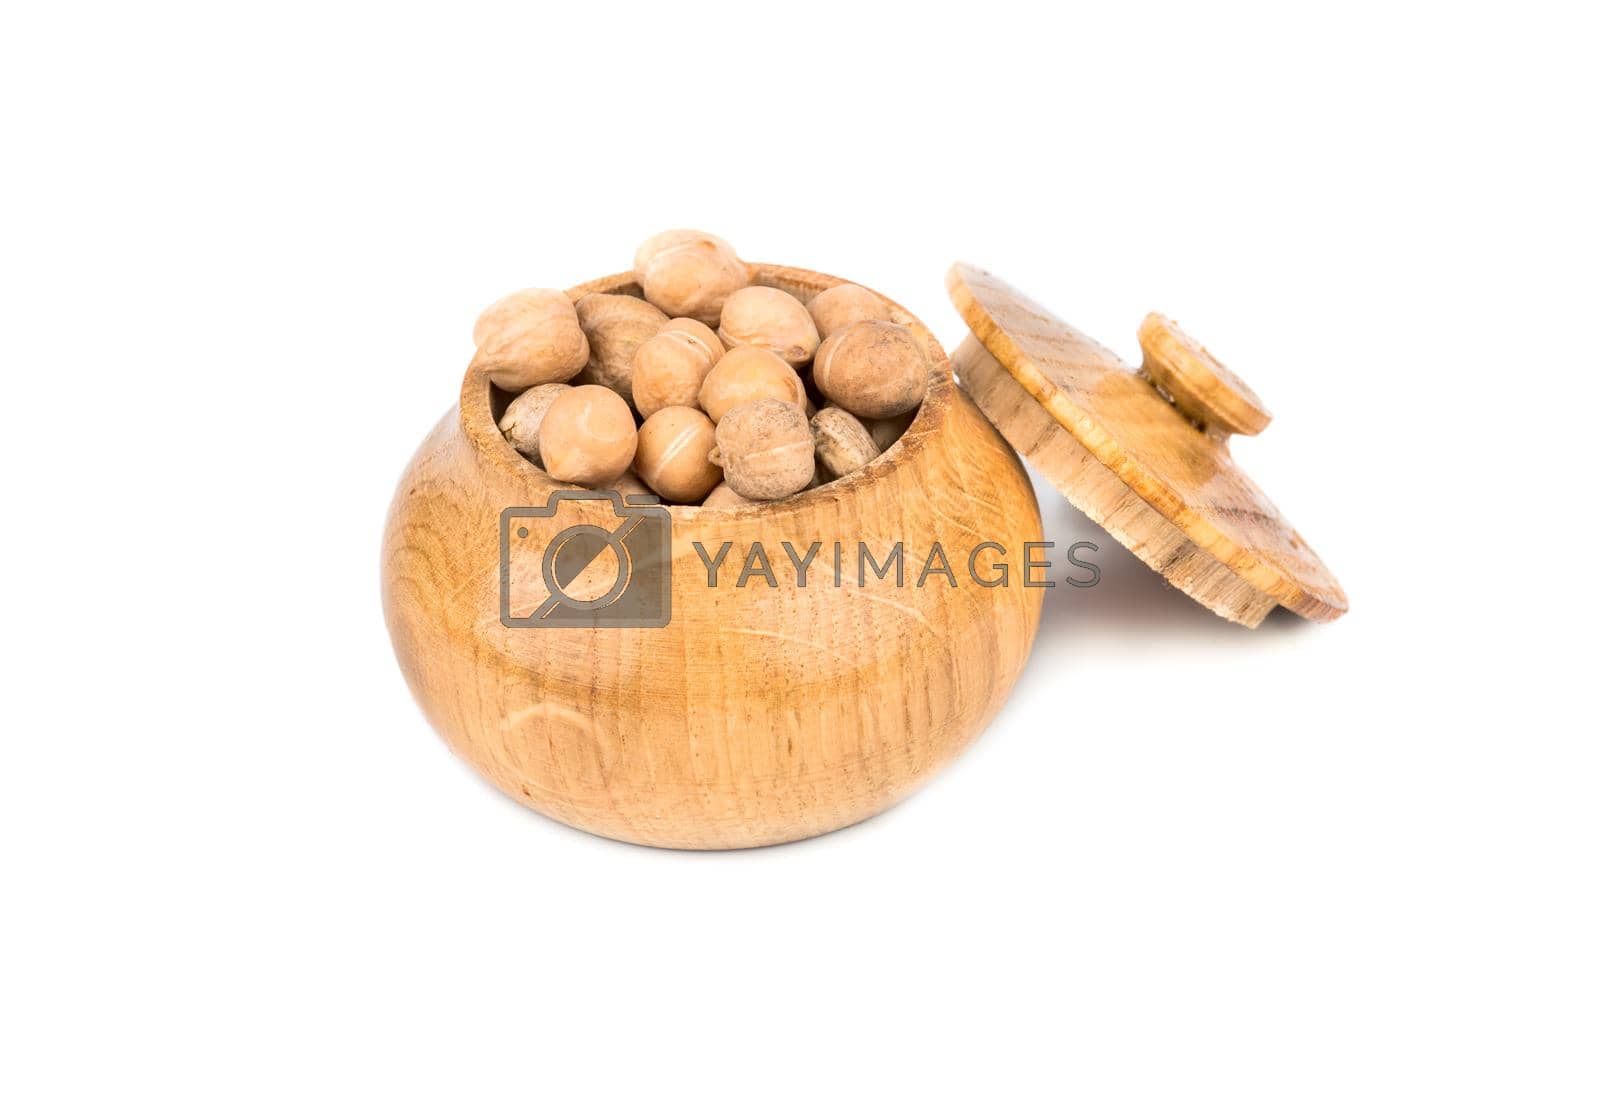 Royalty free image of Dry chickpeas by andregric